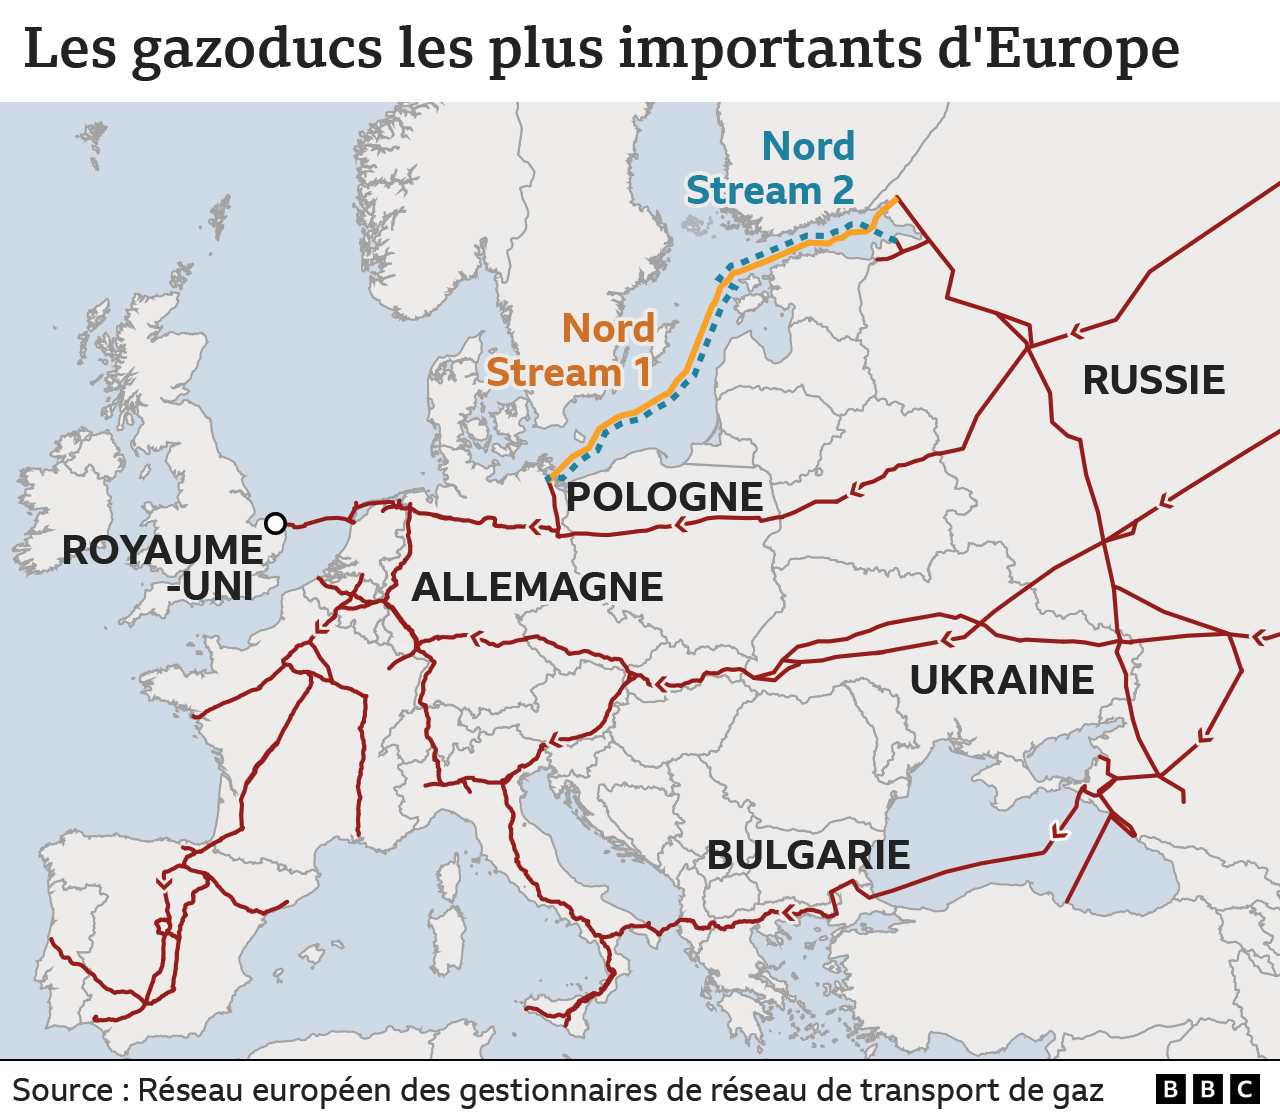 https://ichef.bbci.co.uk/news/800/cpsprodpb/90F6/production/_125001173_natural_gas_pipelines_v8_chevrons__french_2x640-nc-2x-nc.png